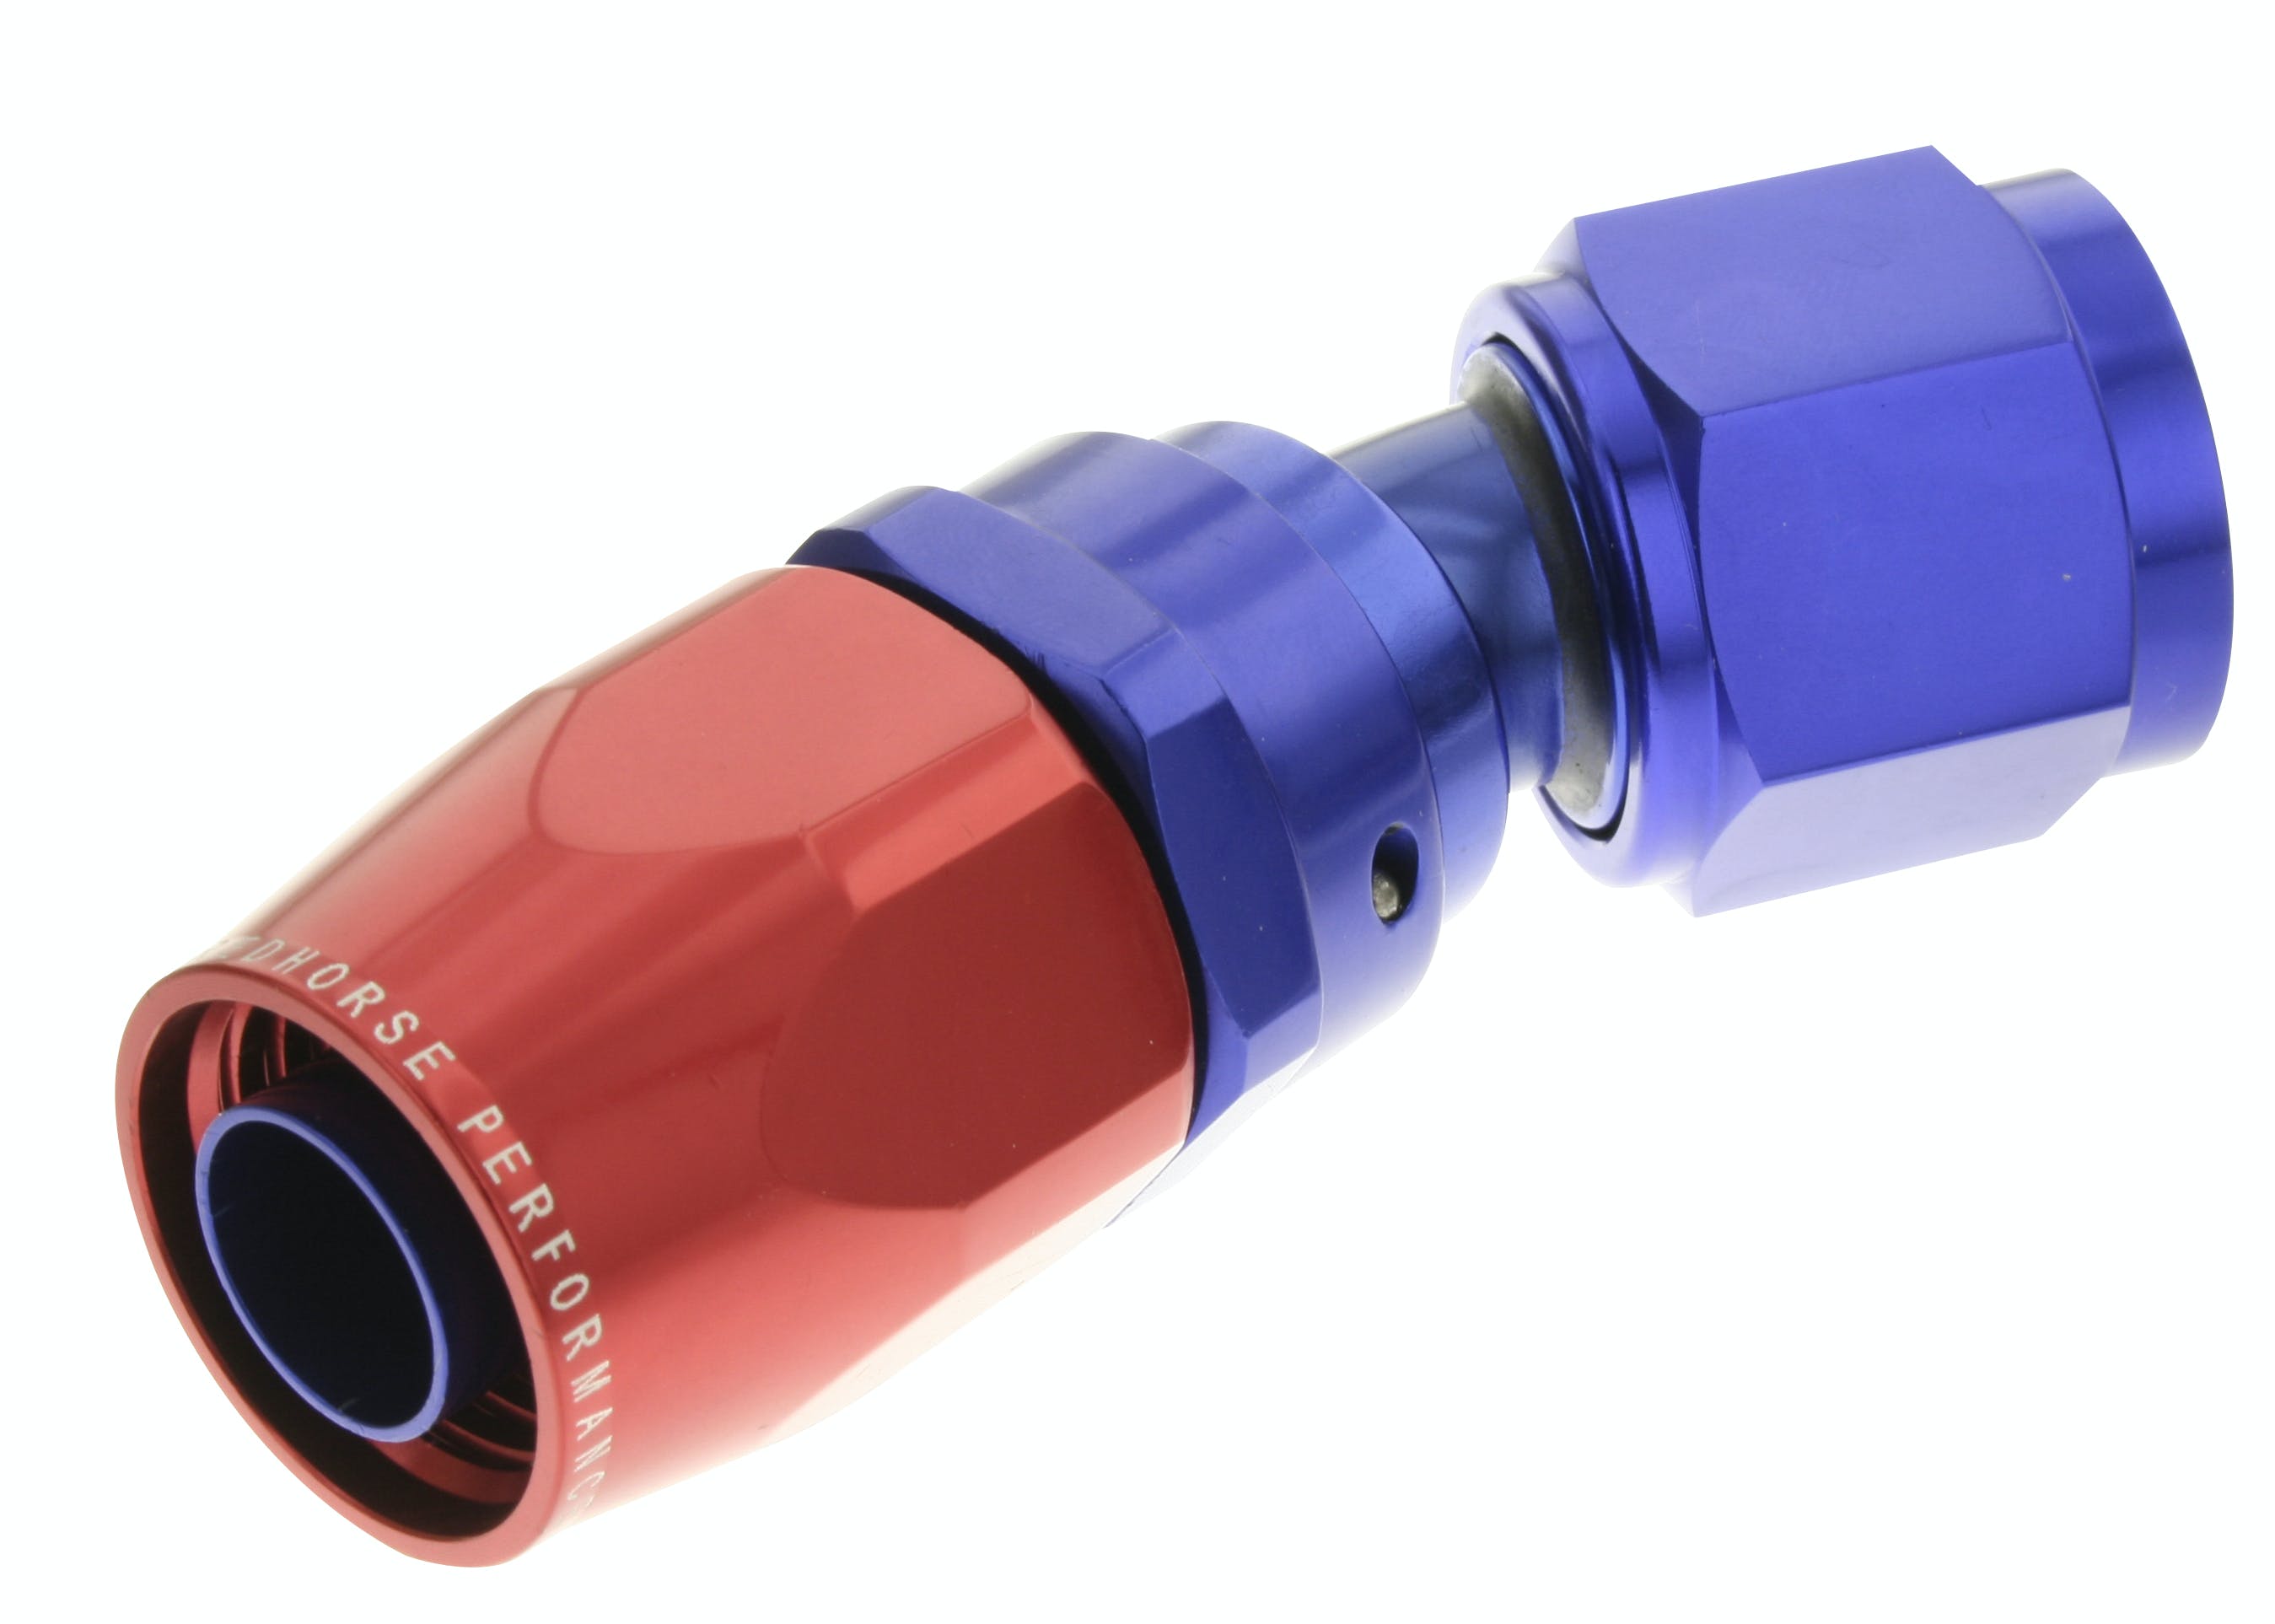 Redhorse Performance 1030-16-1 -16 30 degree Female Aluminum Hose End - red and blue